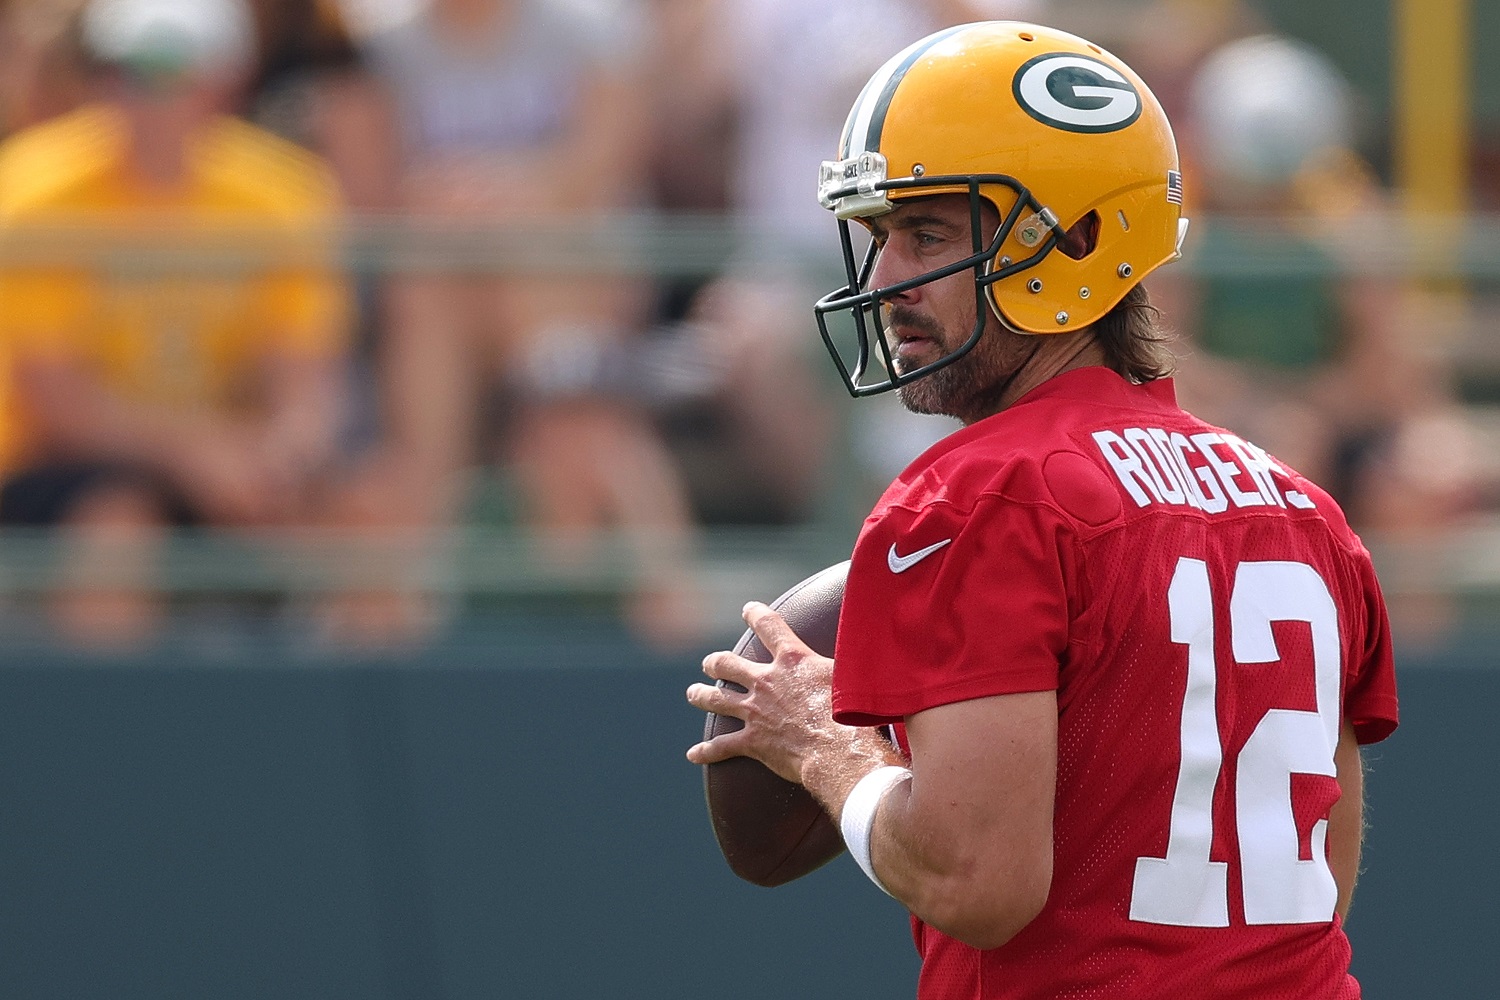 Aaron Rodgers of the Green Bay Packers works out during training camp at Ray Nitschke Field on July 29, 2021, in Ashwaubenon, Wisconsin.